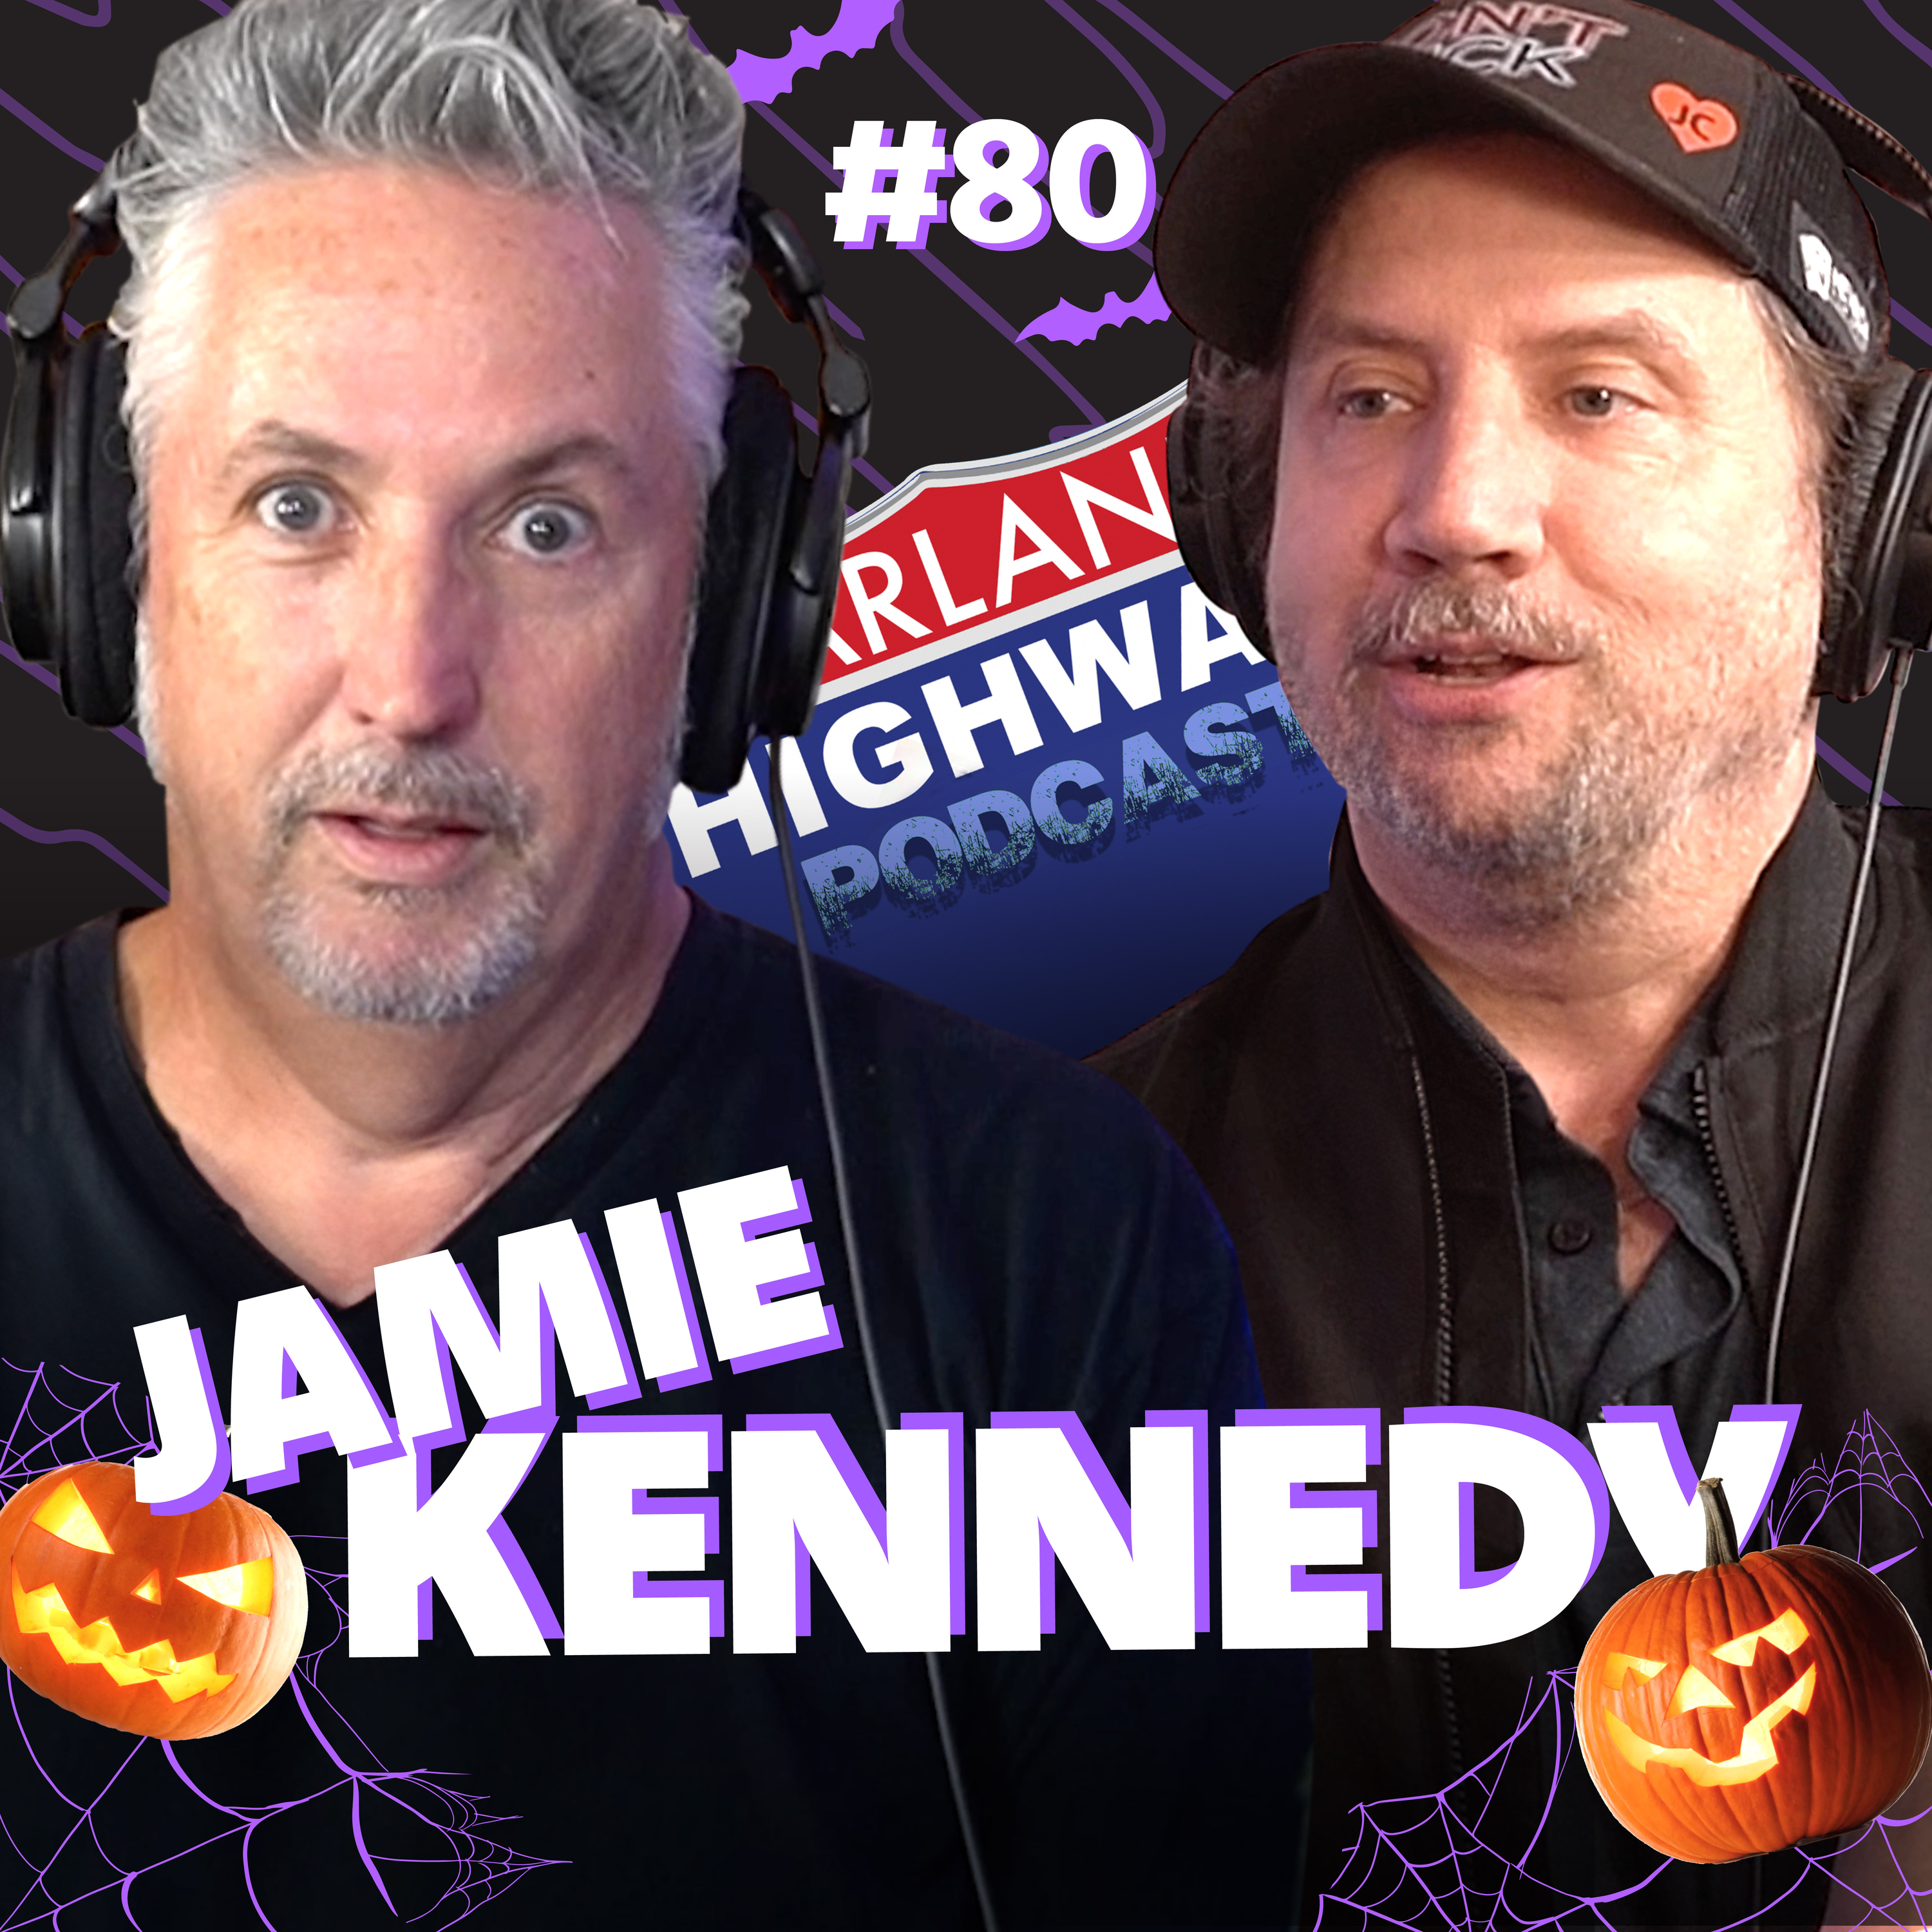 The NEW HARLAND HIGHWAY - JAMIE KENNEDY #80